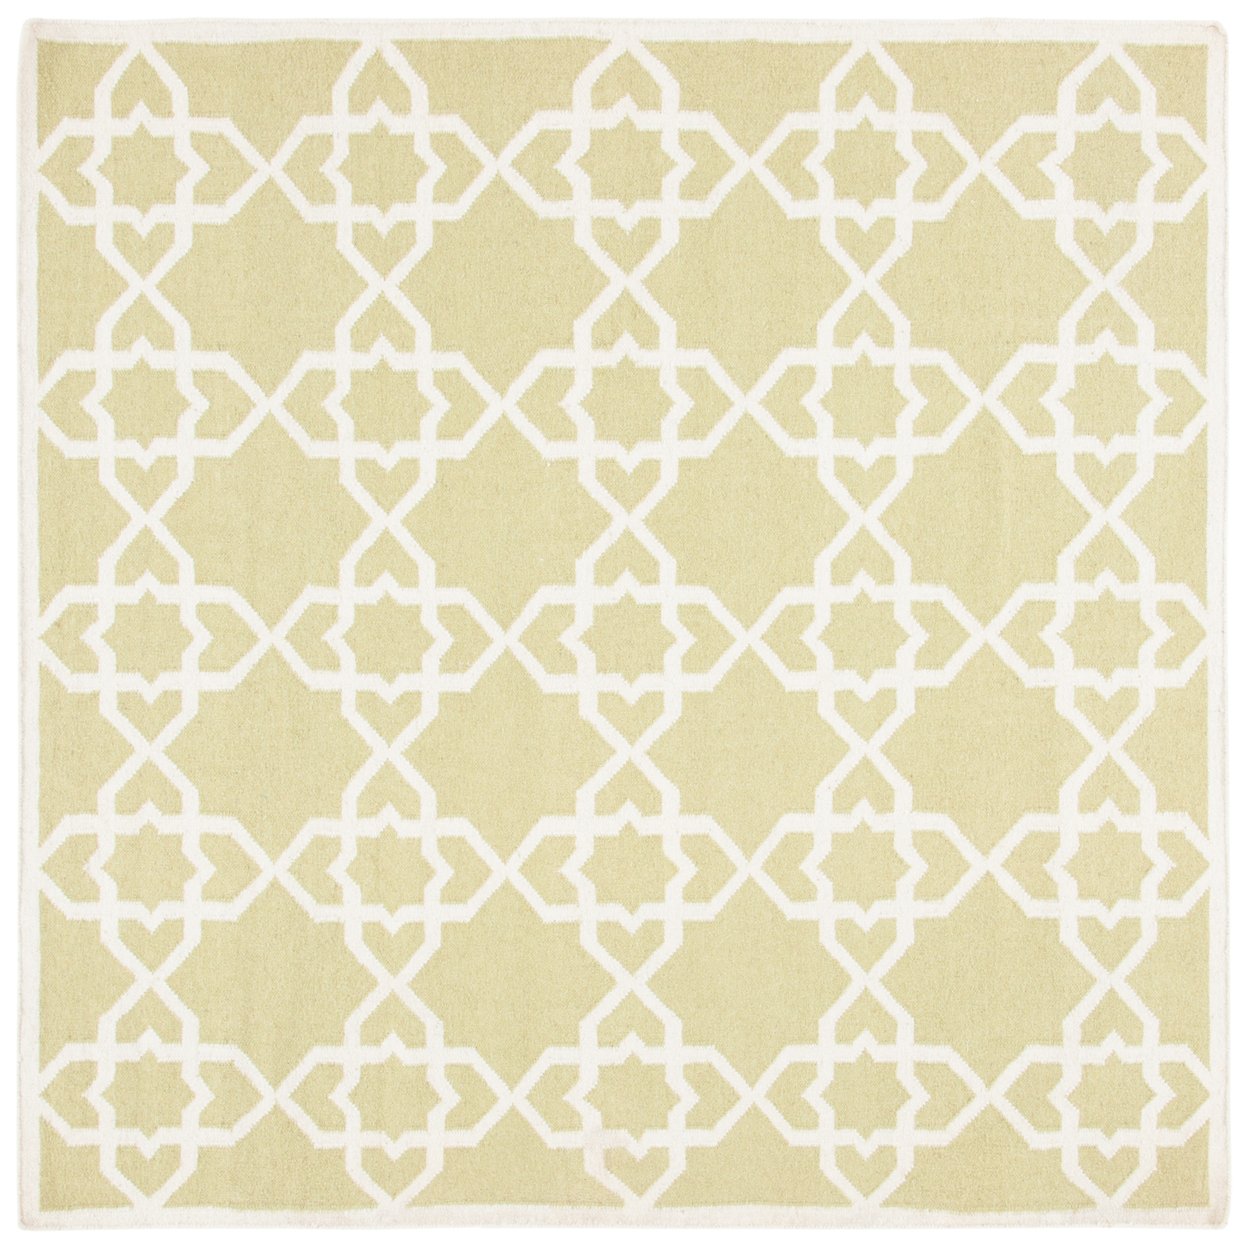 SAFAVIEH Dhurries DHU548A Handwoven Olive / Ivory Rug - 8' Square